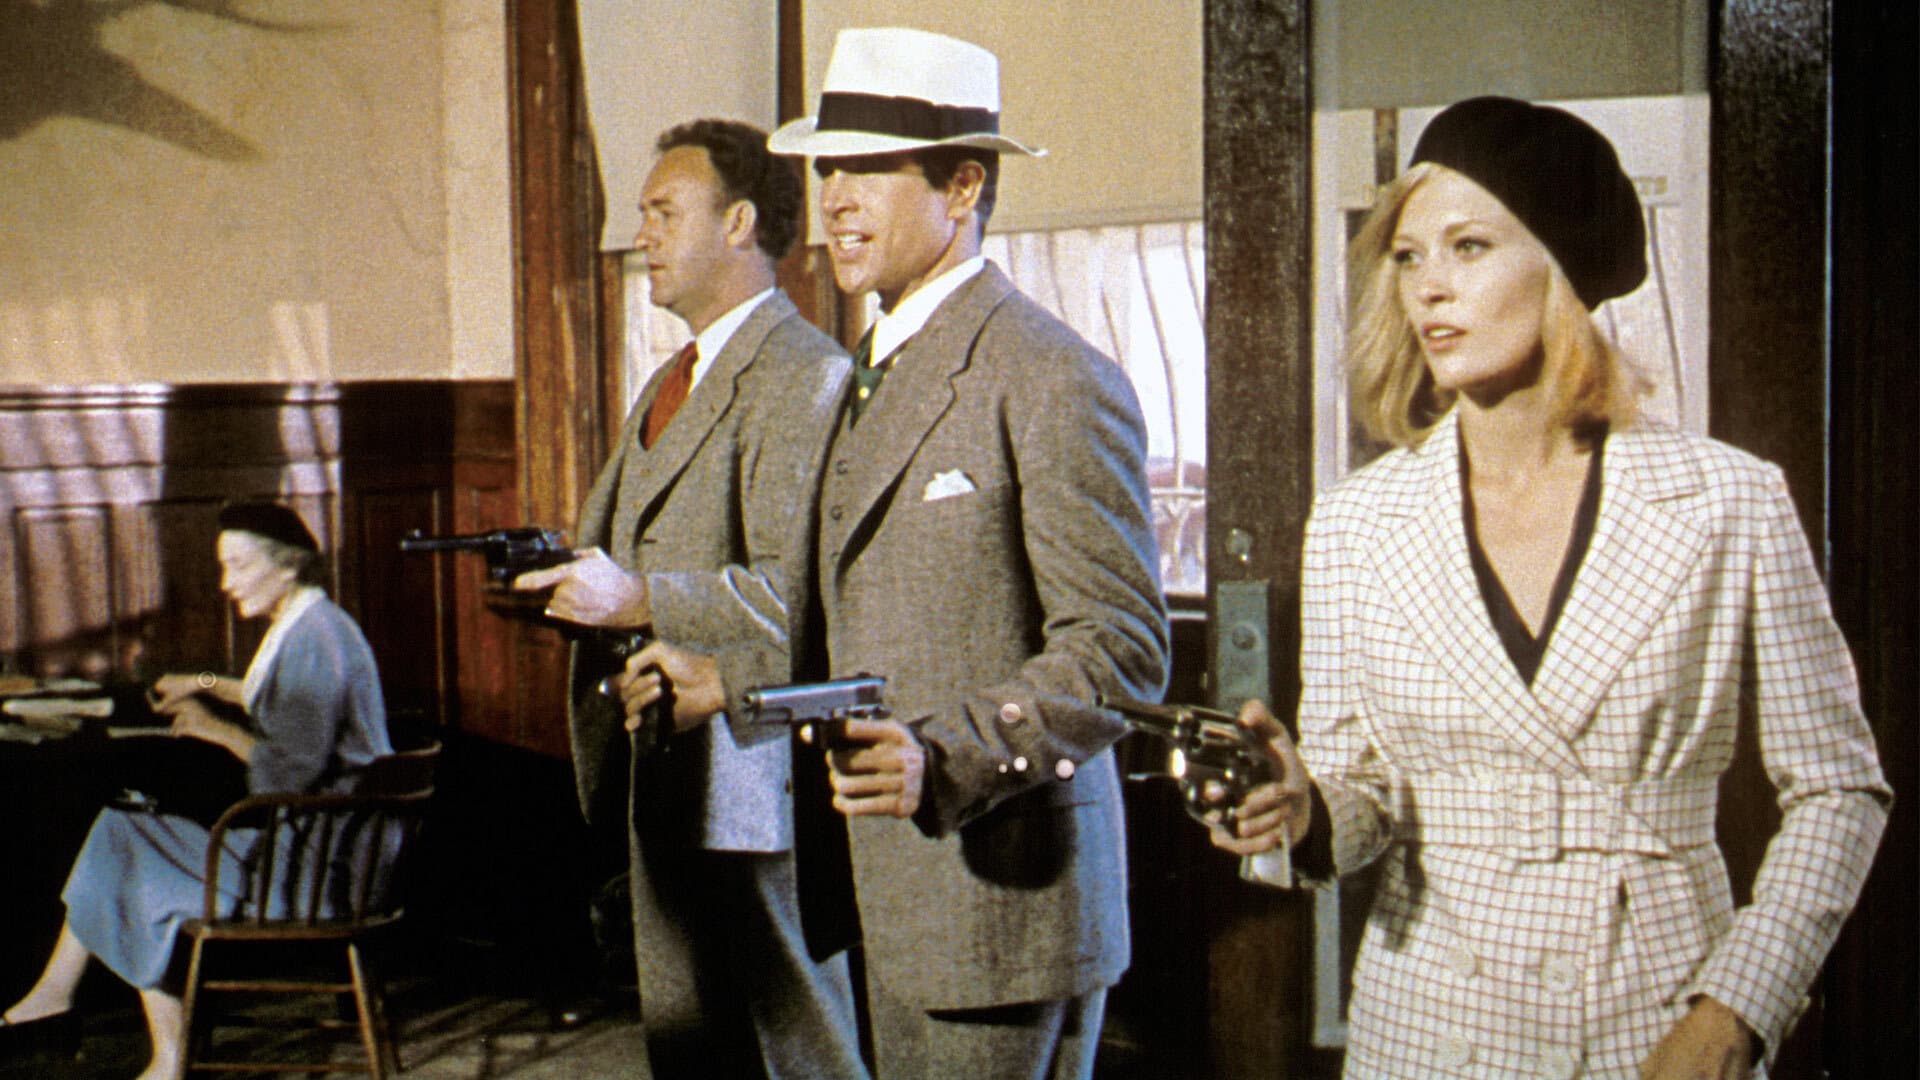 Still from "Bonnie and Clyde"